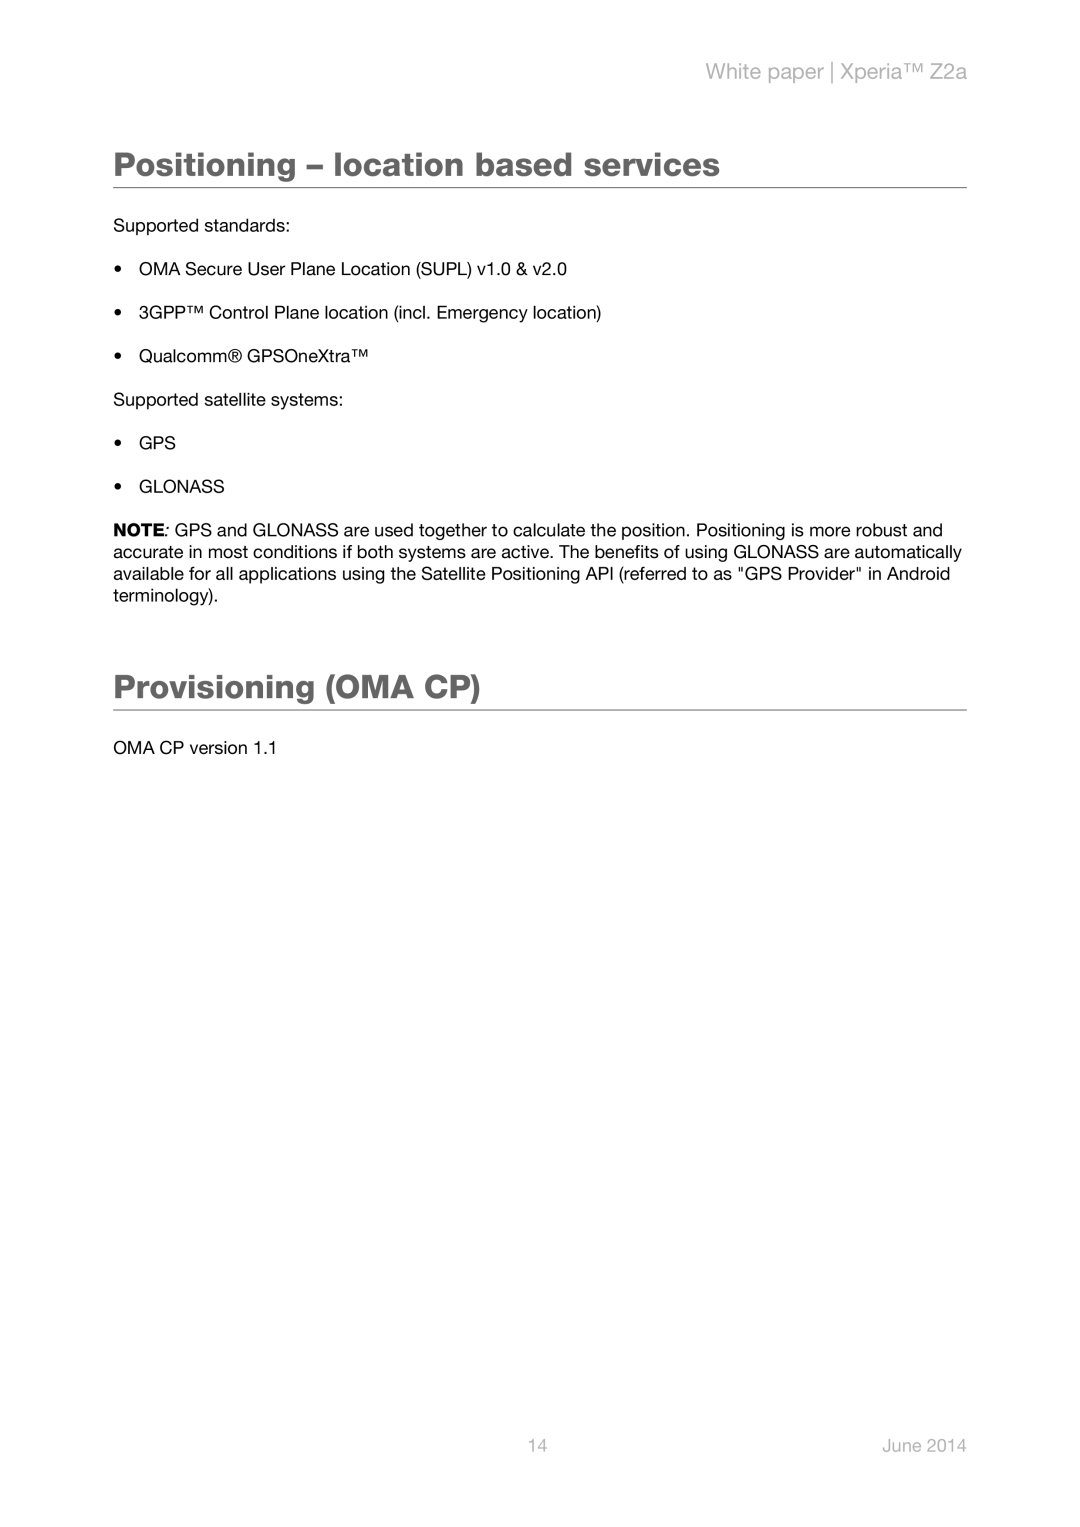 Sony manual Positioning - location based services, Provisioning OMA CP, White paper Xperia Z2a, June 